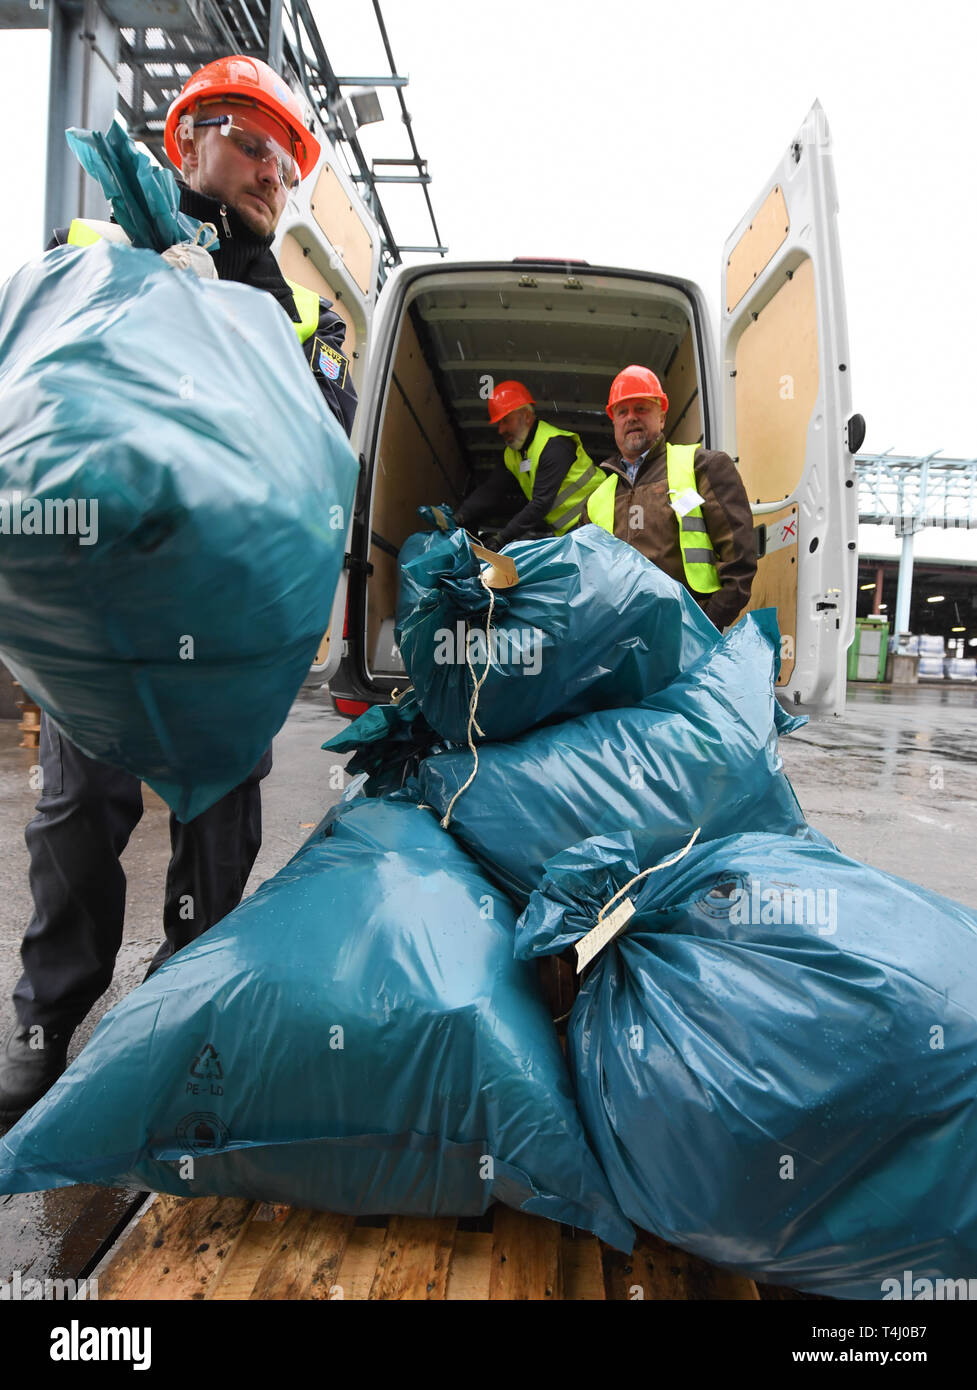 https://c8.alamy.com/comp/T4J0B7/04-april-2019-hessen-biebesheim-am-rhein-blue-refuse-sacks-containing-seized-drugs-are-parked-on-a-pallet-on-the-premises-of-the-indaver-gmbh-hazardous-waste-incineration-plant-once-a-year-the-public-prosecutors-office-in-wiesbaden-has-drugs-such-as-marijuana-cocaine-heroin-amphetamine-from-the-evidence-room-which-have-been-seized-in-the-past-twelve-months-in-the-course-of-criminal-proceedings-destroyed-here-at-the-experts-in-biebesheim-everything-under-the-investigators-supervision-is-burned-in-a-rotary-kiln-at-temperatures-of-1200-degrees-photo-arne-dedertdpa-T4J0B7.jpg